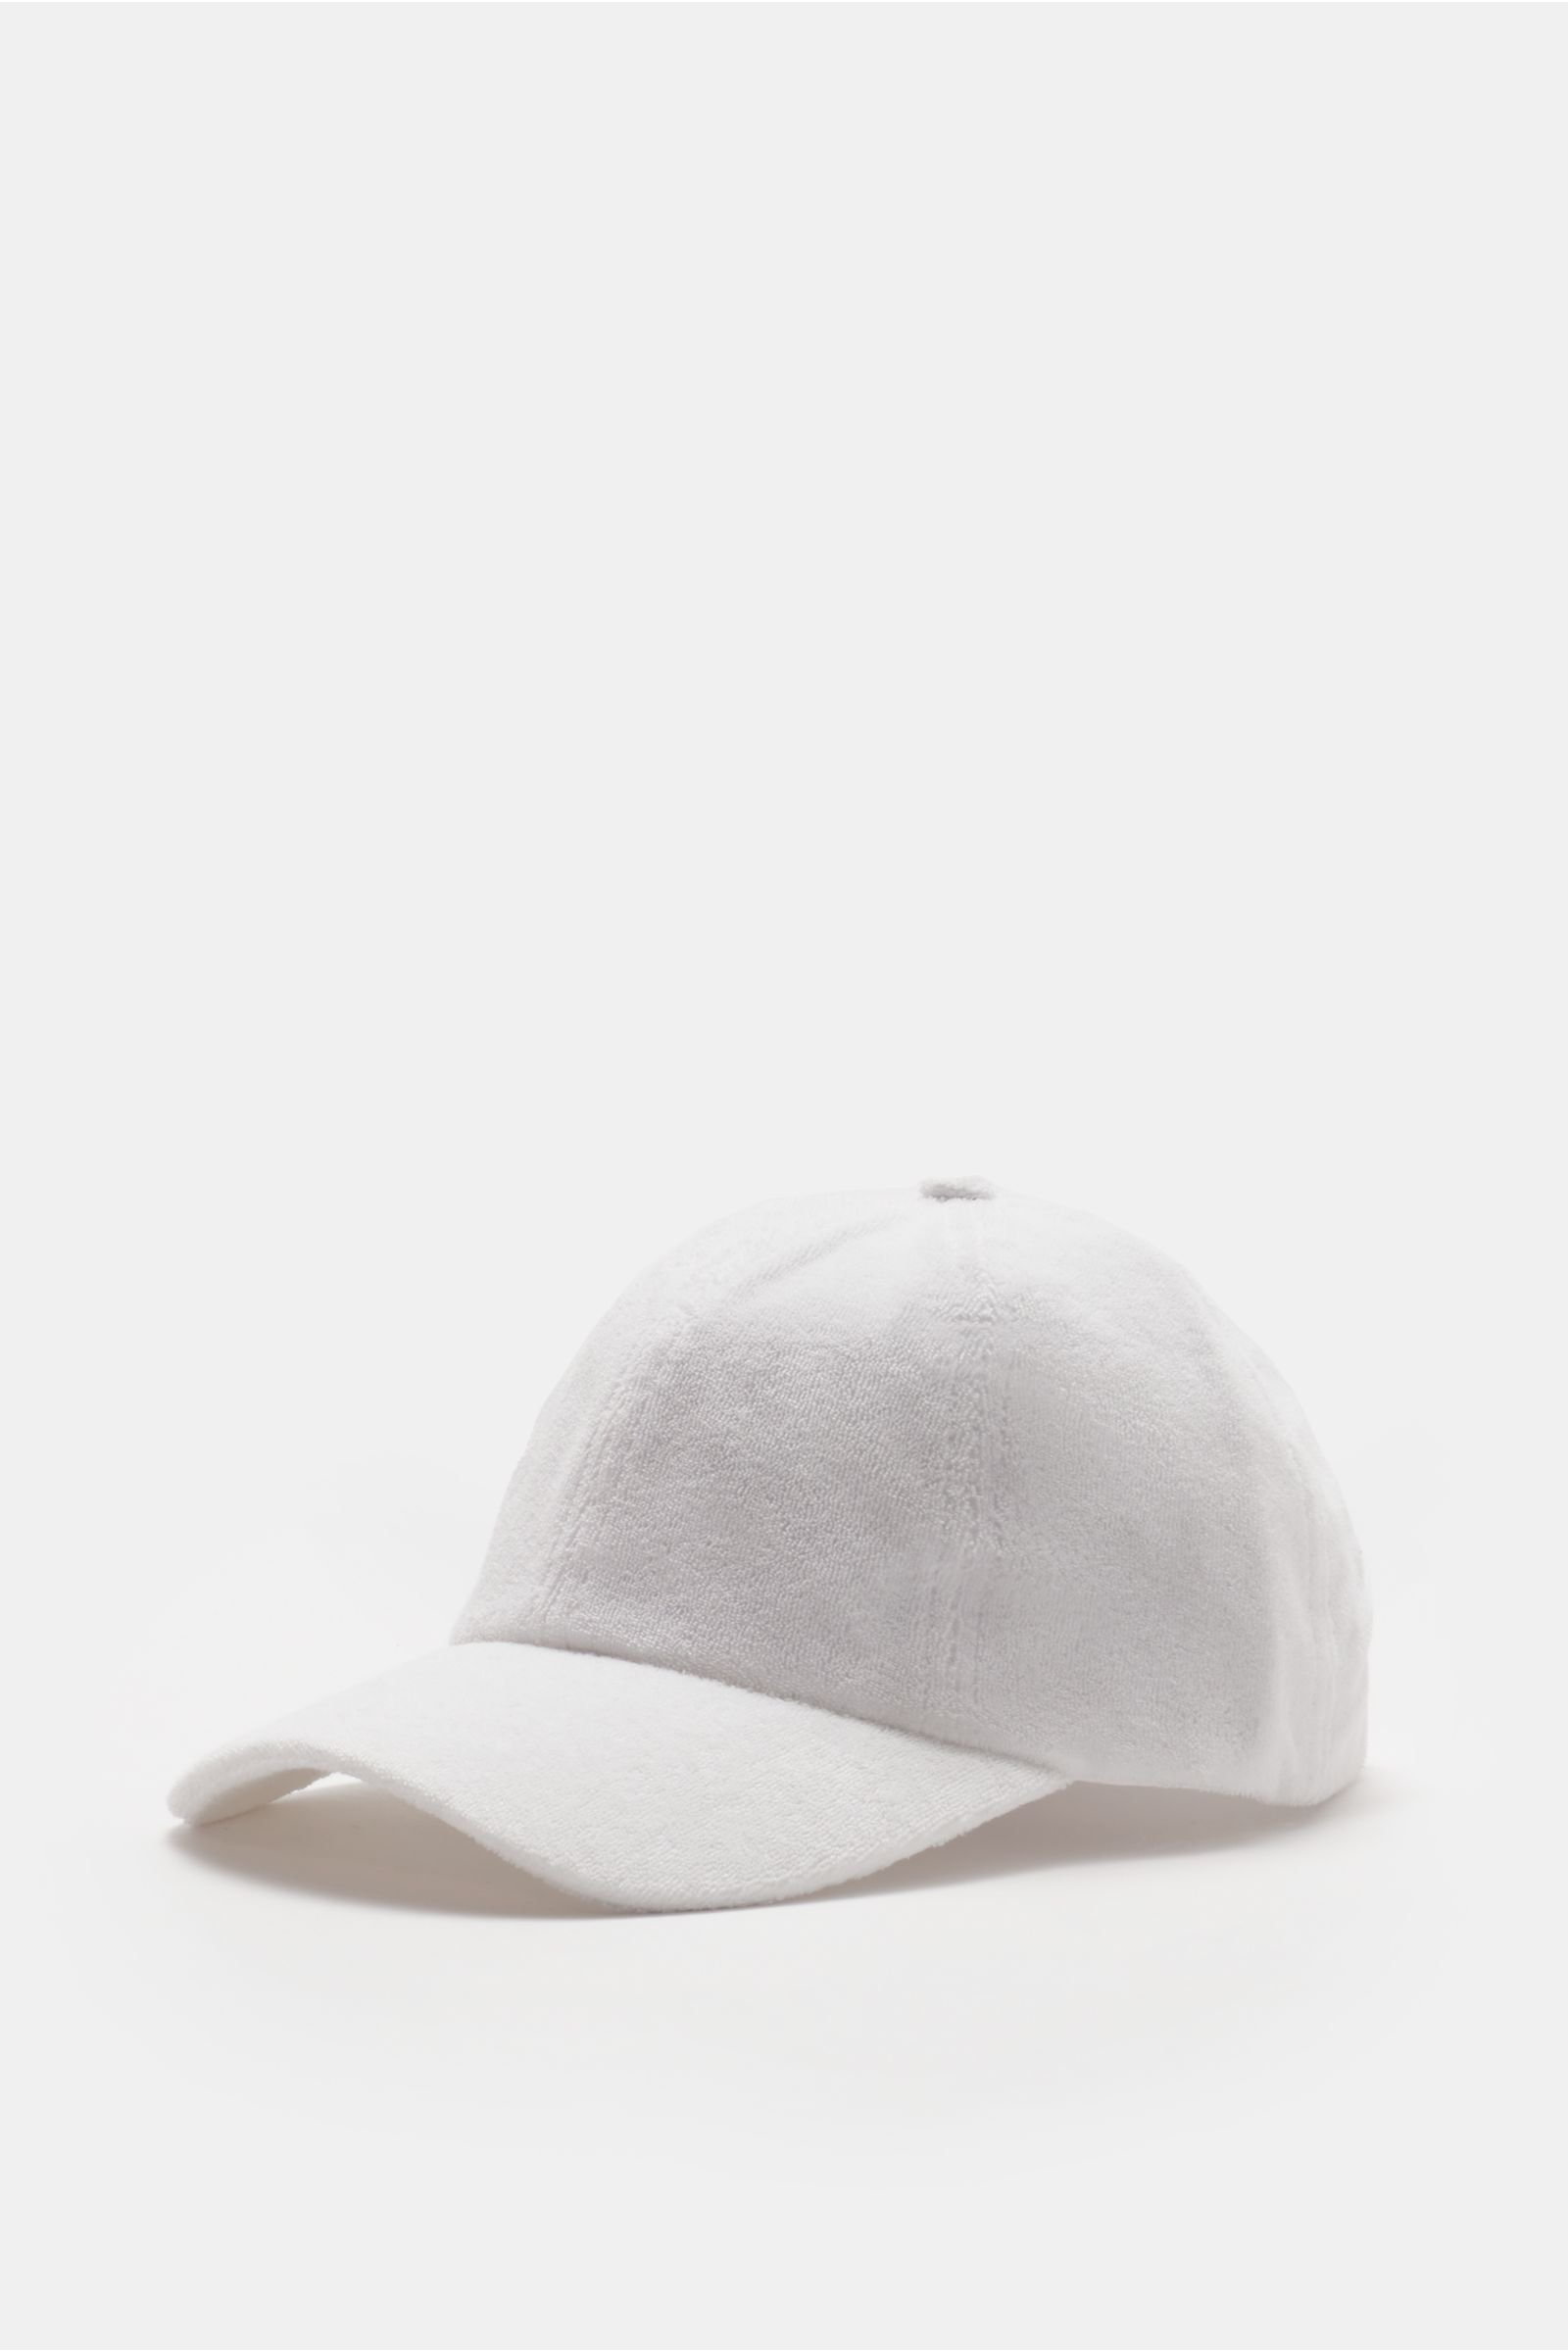 Terry cap 'Oyster' white